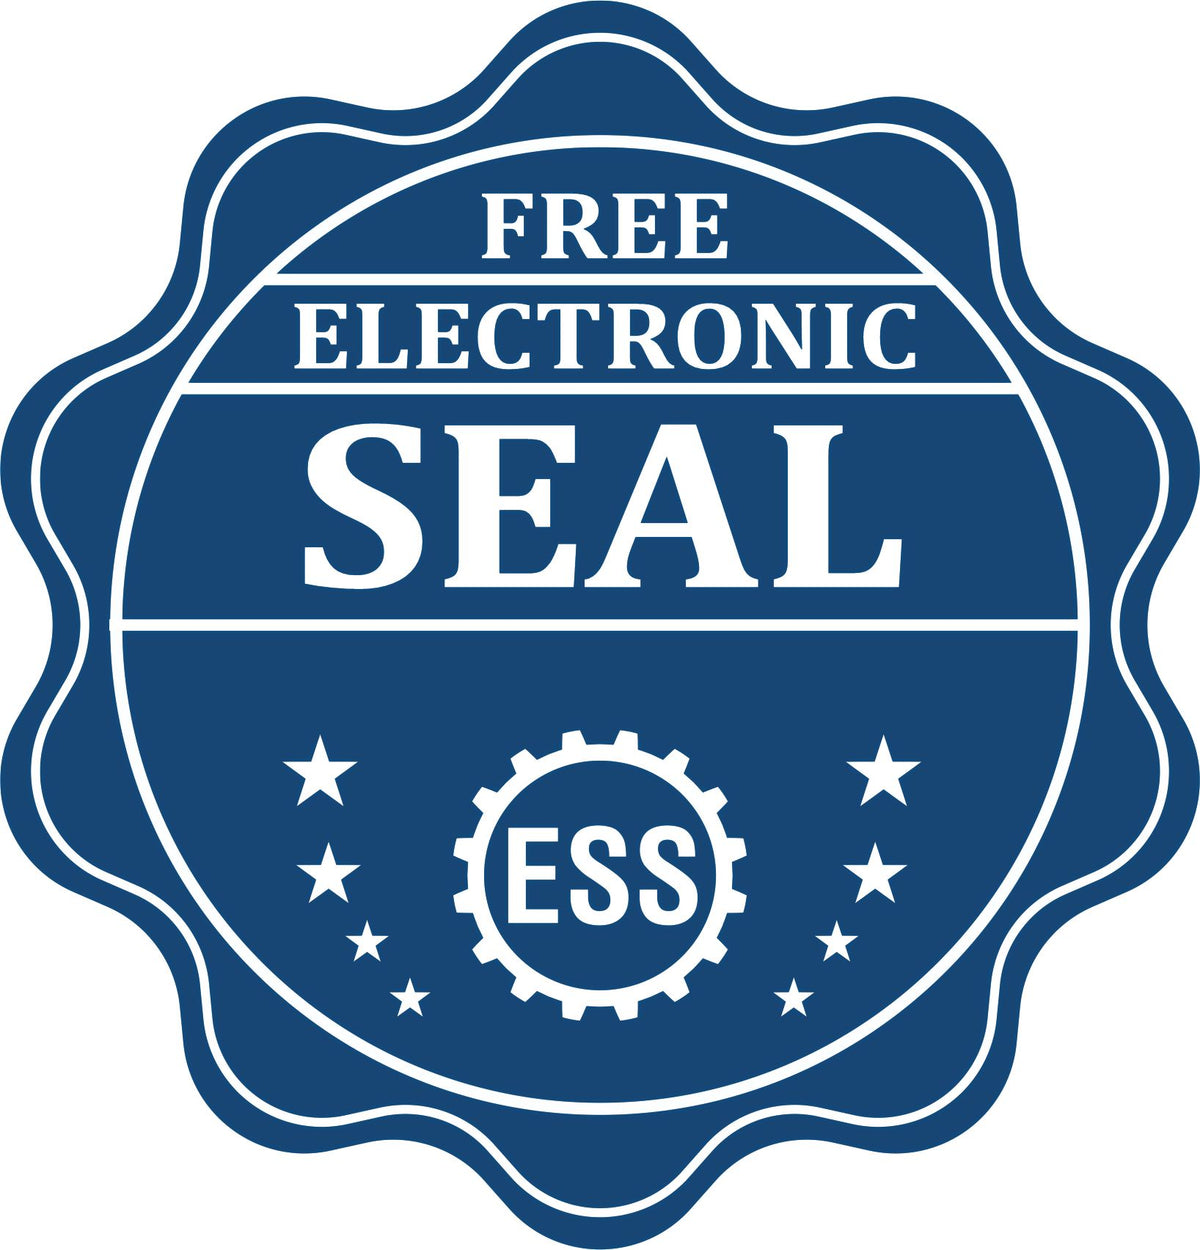 A badge showing a free electronic seal for the Hybrid Nevada Engineer Seal with stars and the ESS gear on the emblem.